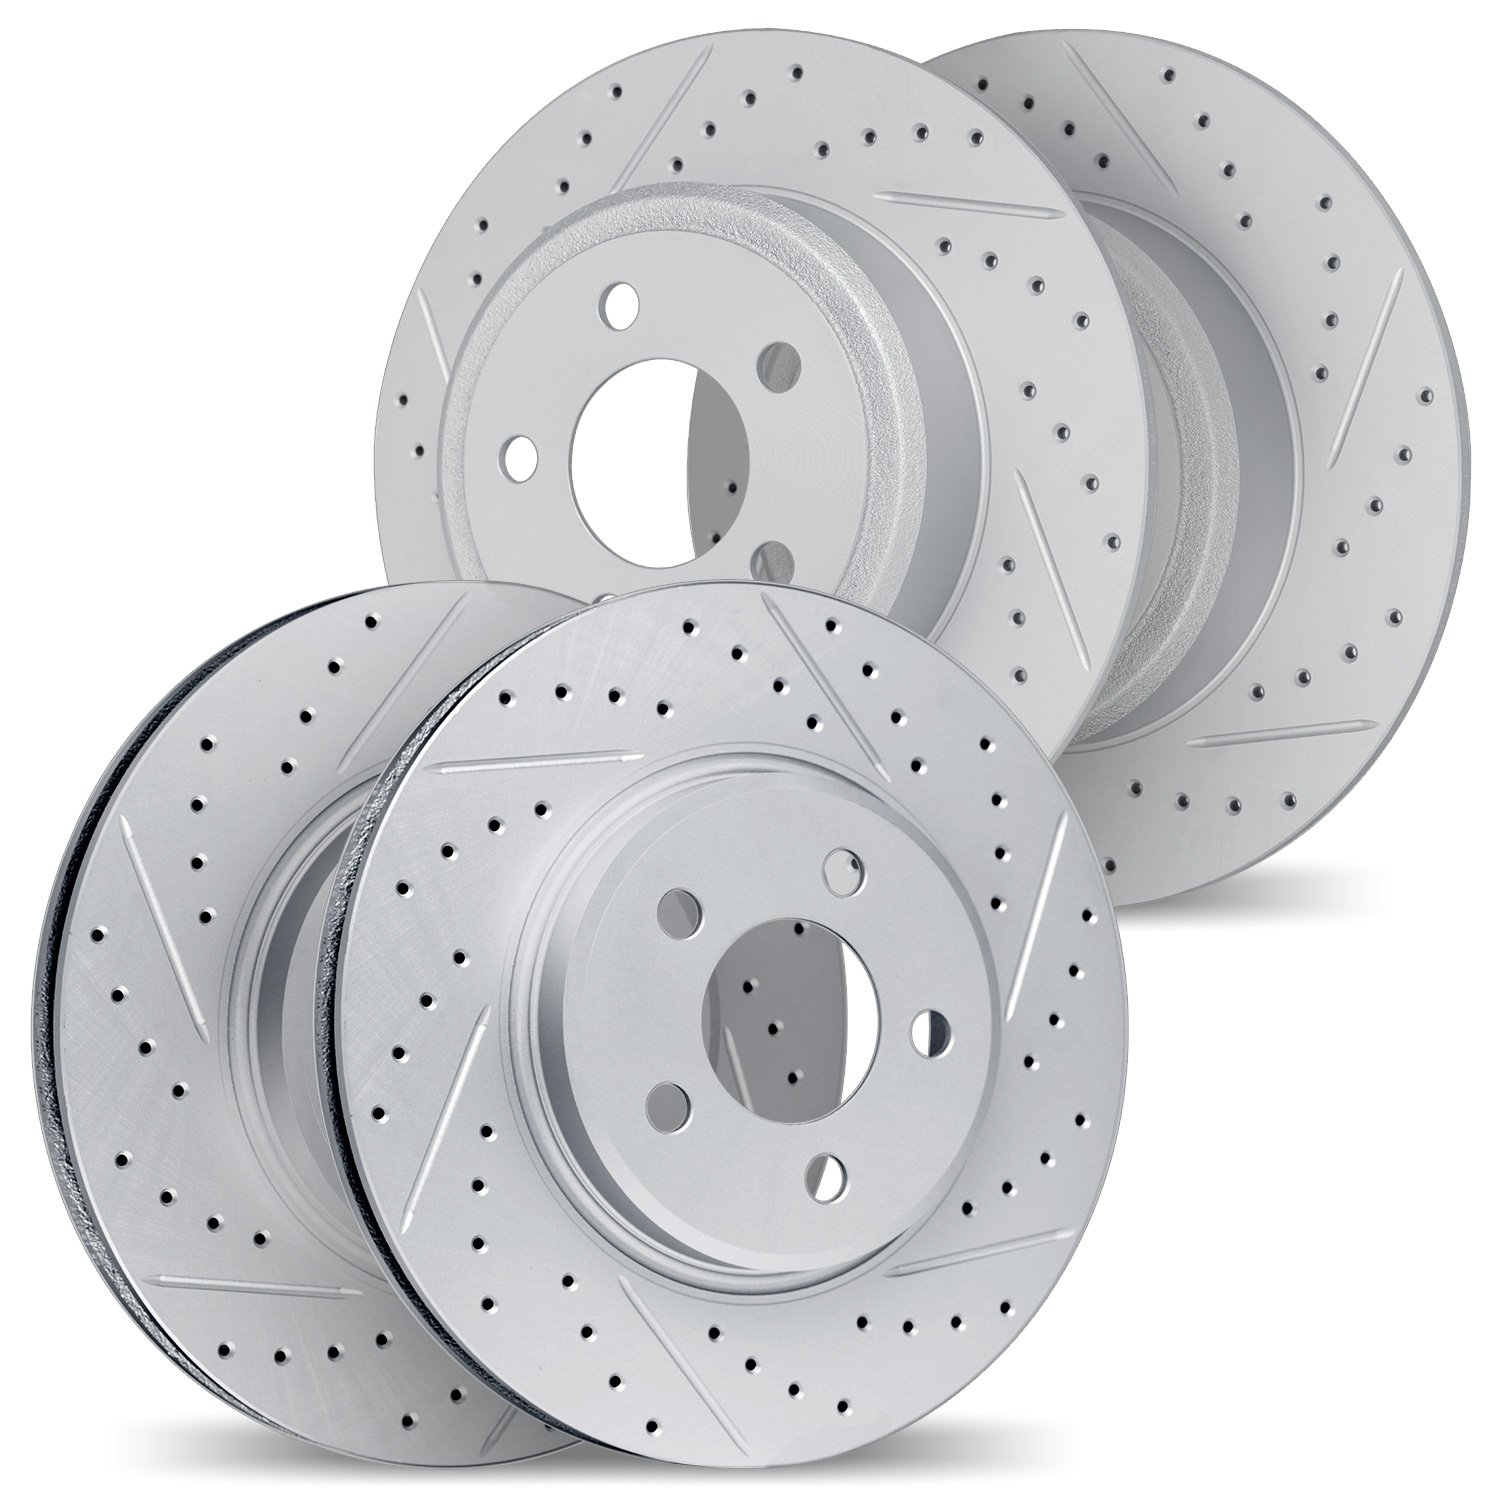 2004-13032 Geoperformance Drilled/Slotted Brake Rotors, 2005-2005 Subaru, Position: Front and Rear